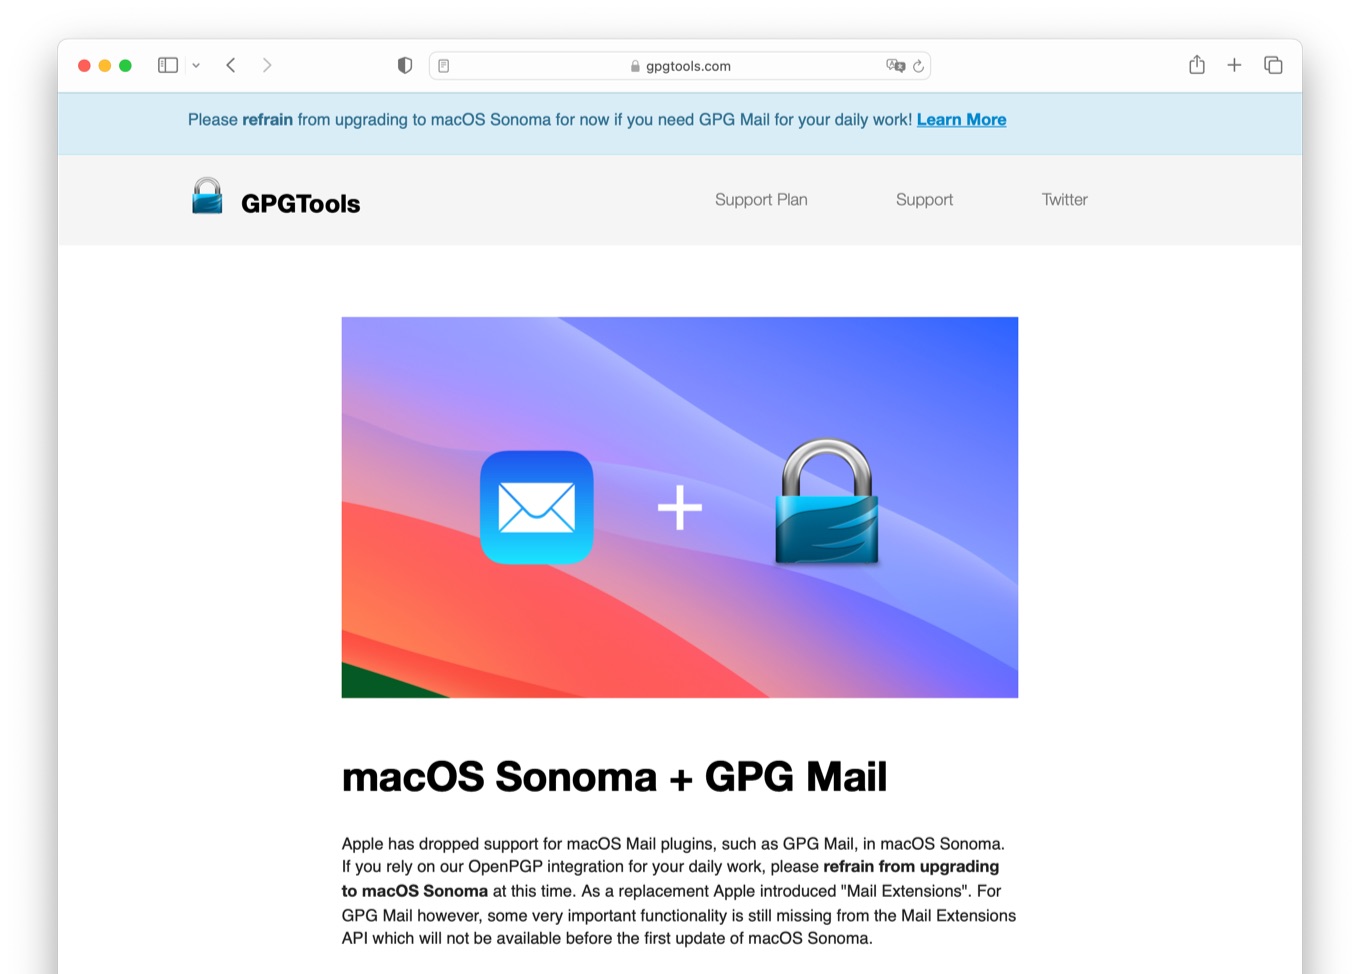 macOS Sonoma + GPG Mail